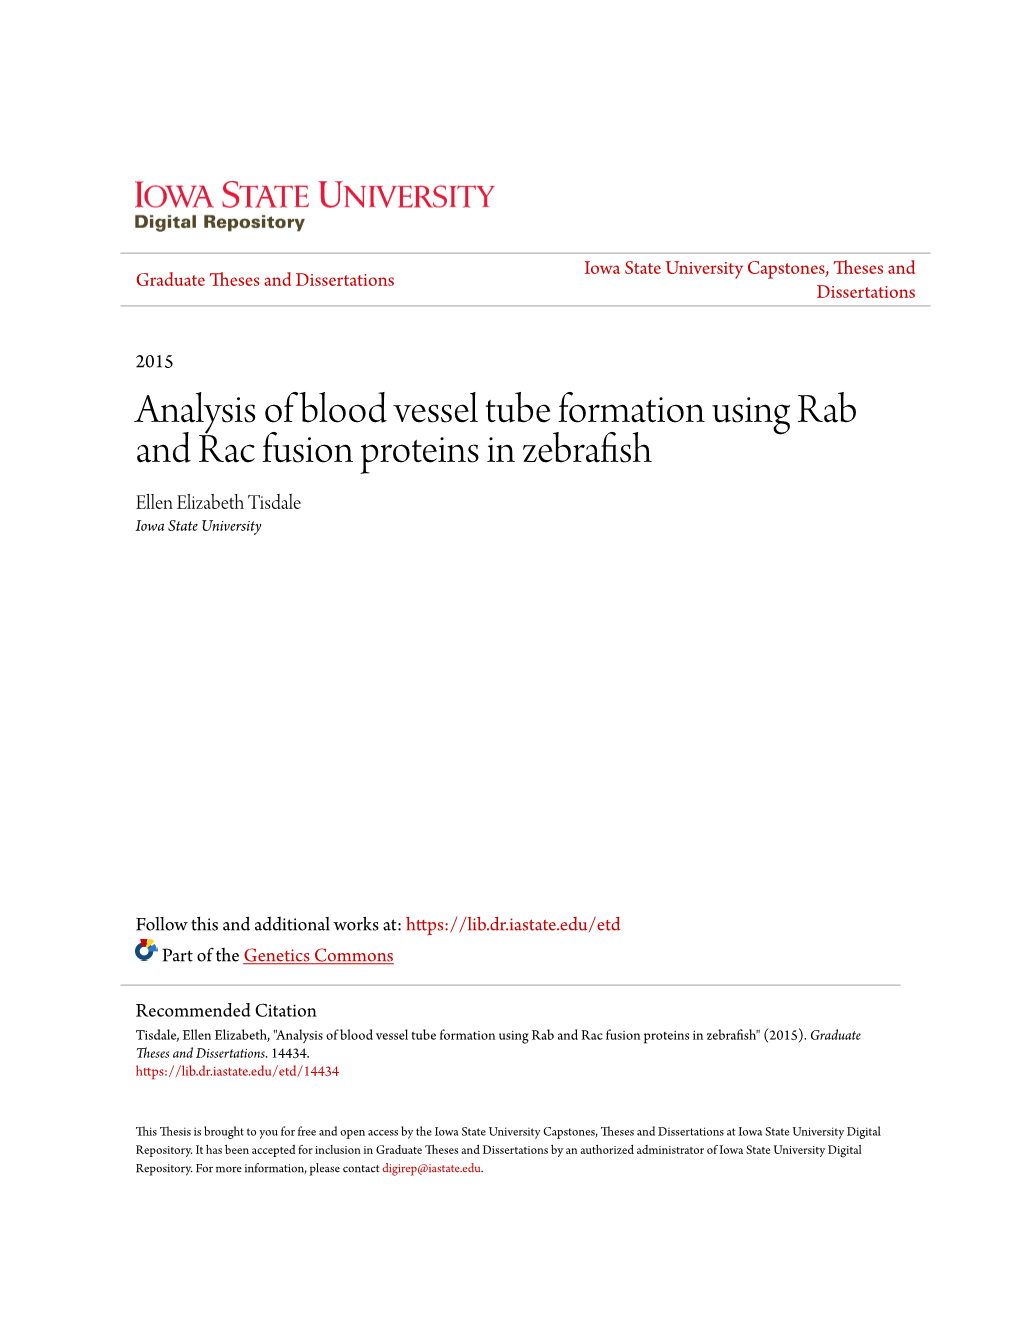 Analysis of Blood Vessel Tube Formation Using Rab and Rac Fusion Proteins in Zebrafish Ellen Elizabeth Tisdale Iowa State University